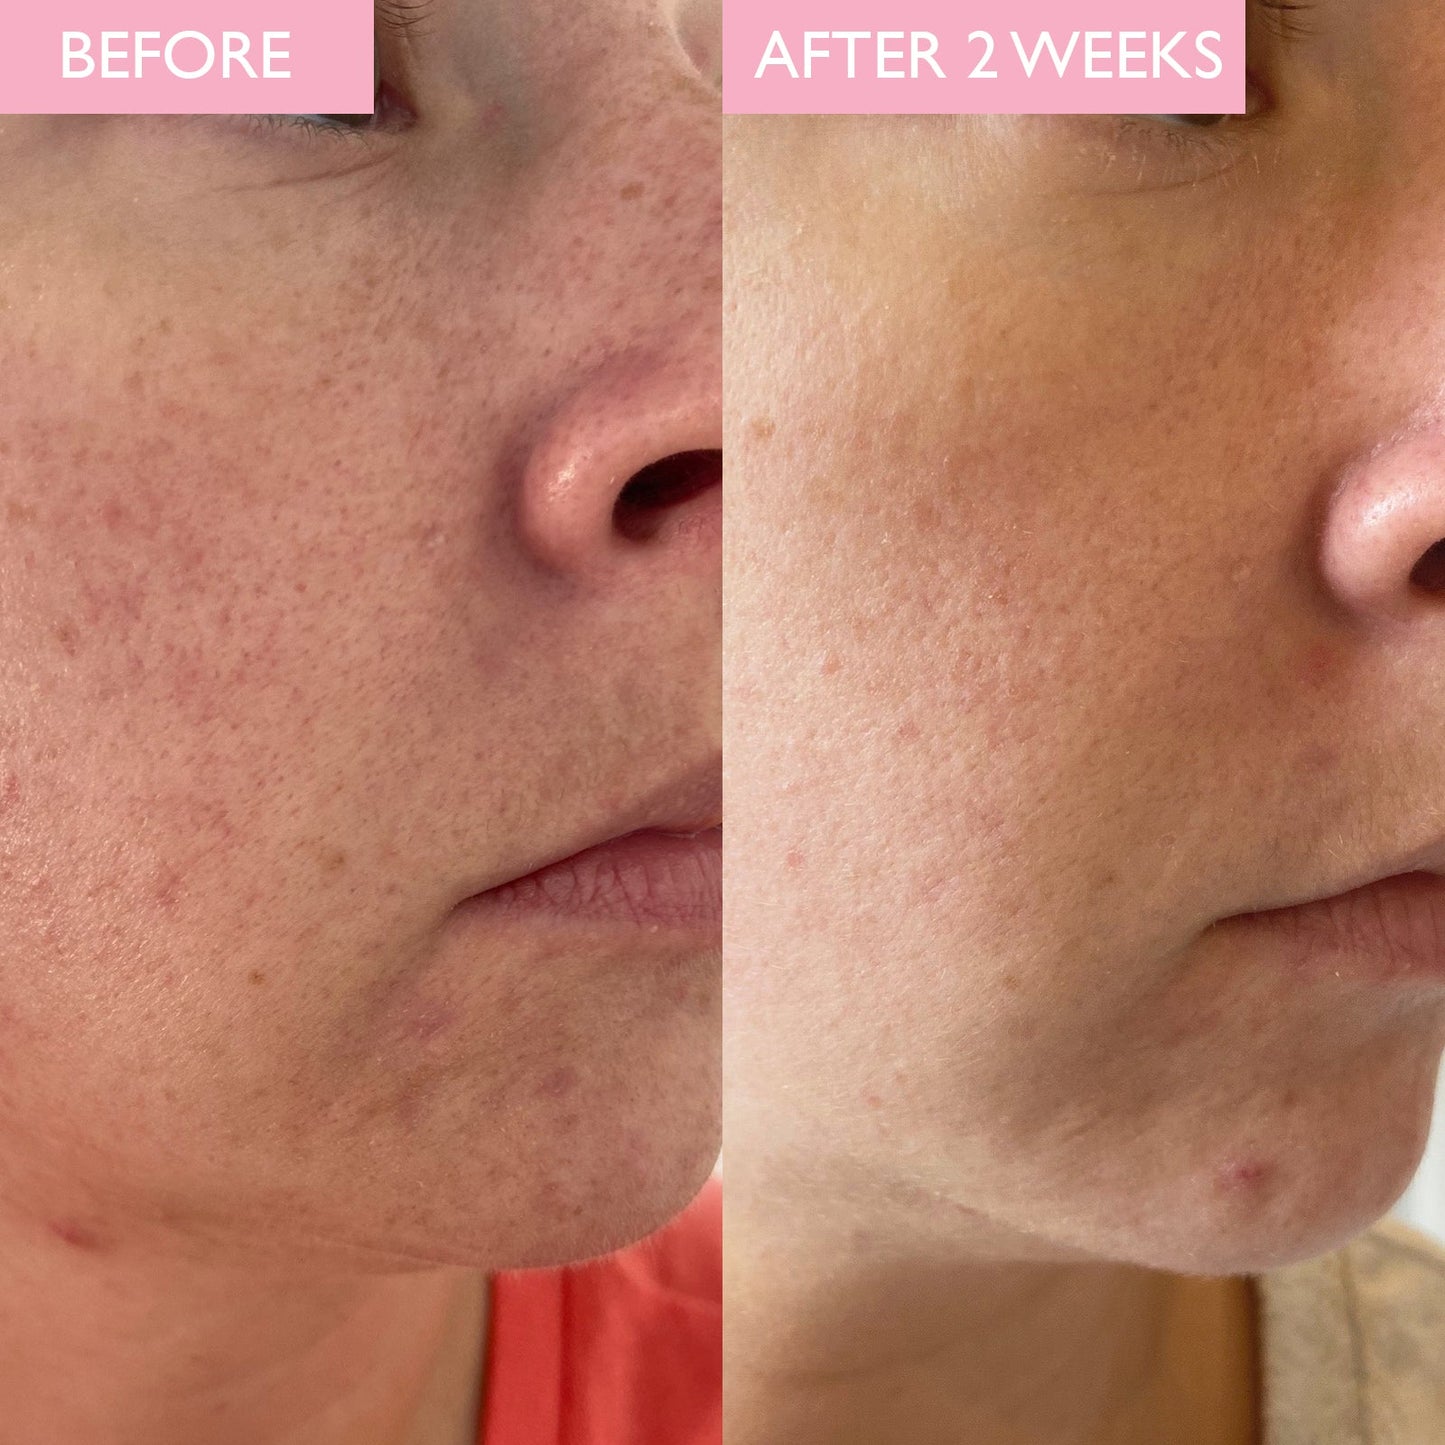 Before and After image of skin improvements from using the revitalising cleanser with grapeseed oil, chamomile and green tea.